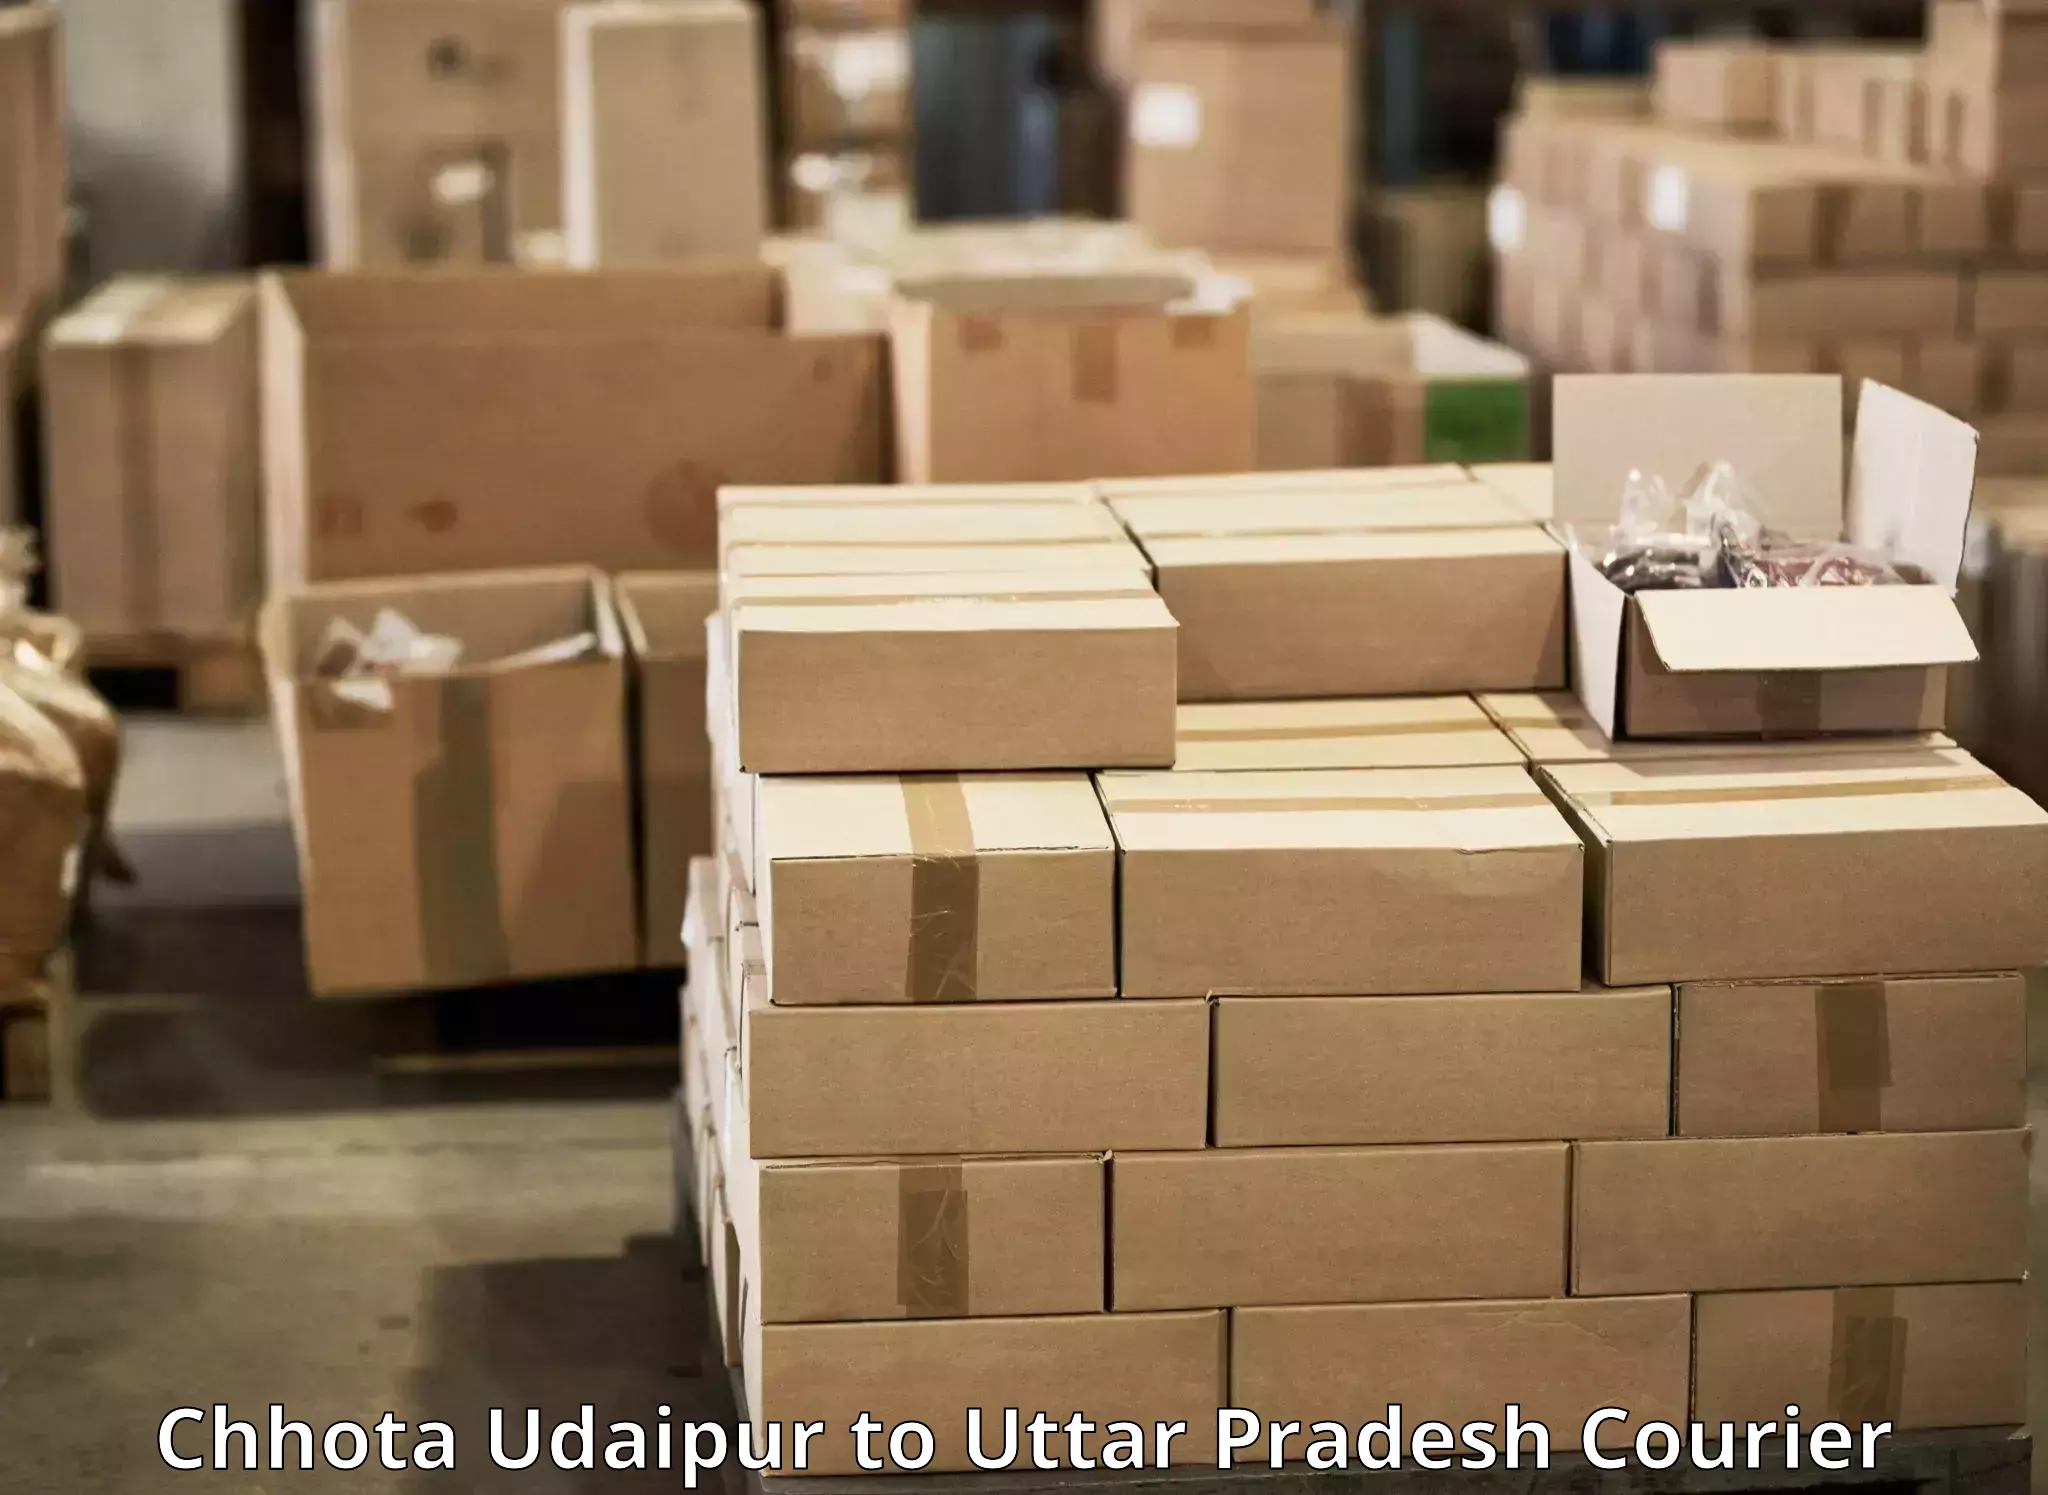 Express courier facilities Chhota Udaipur to Konch